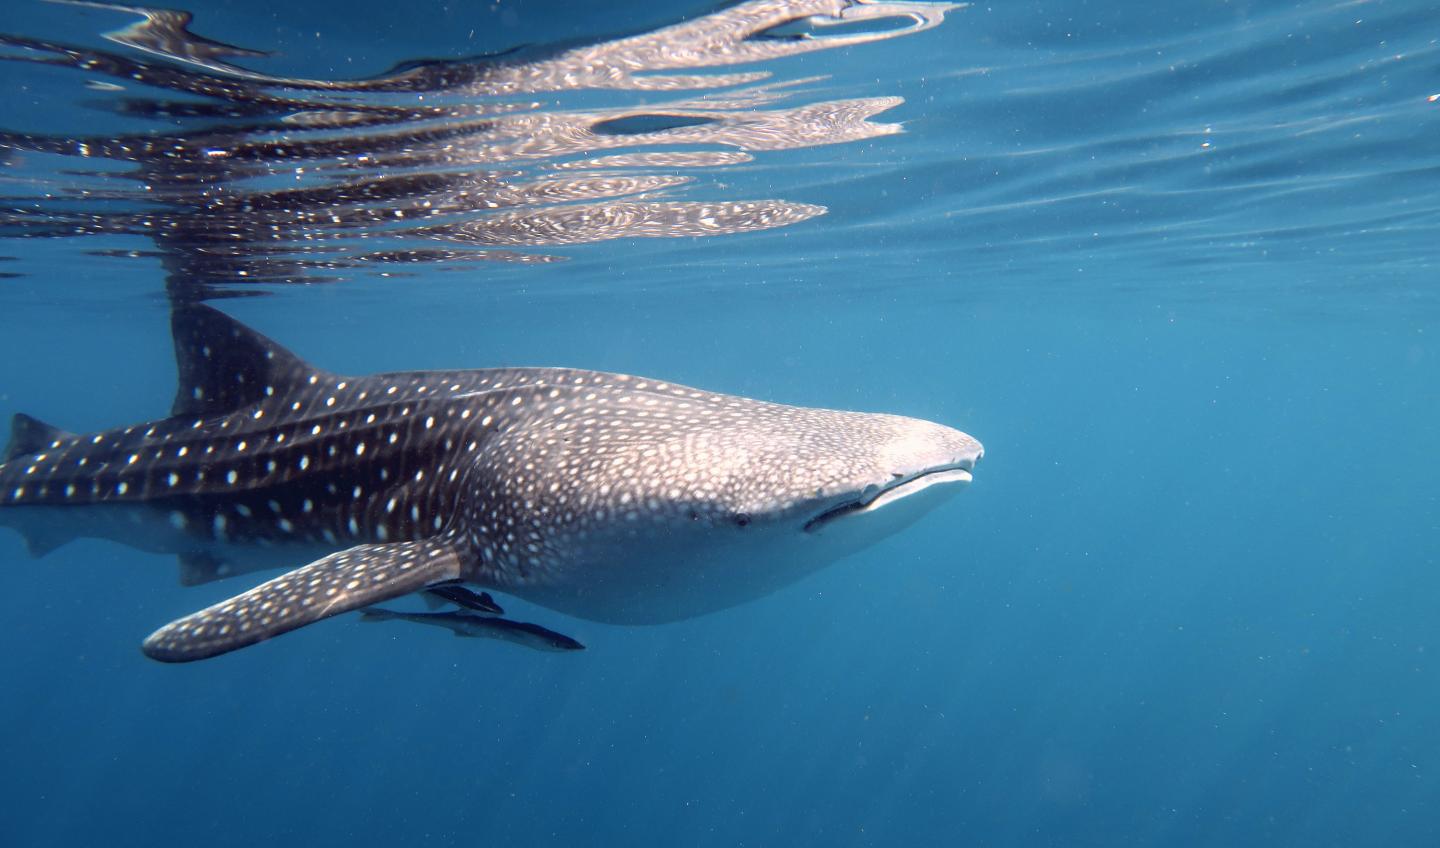 International Team of Marine Scientists Complete Six-Year Whale Shark Study (1 of 2)